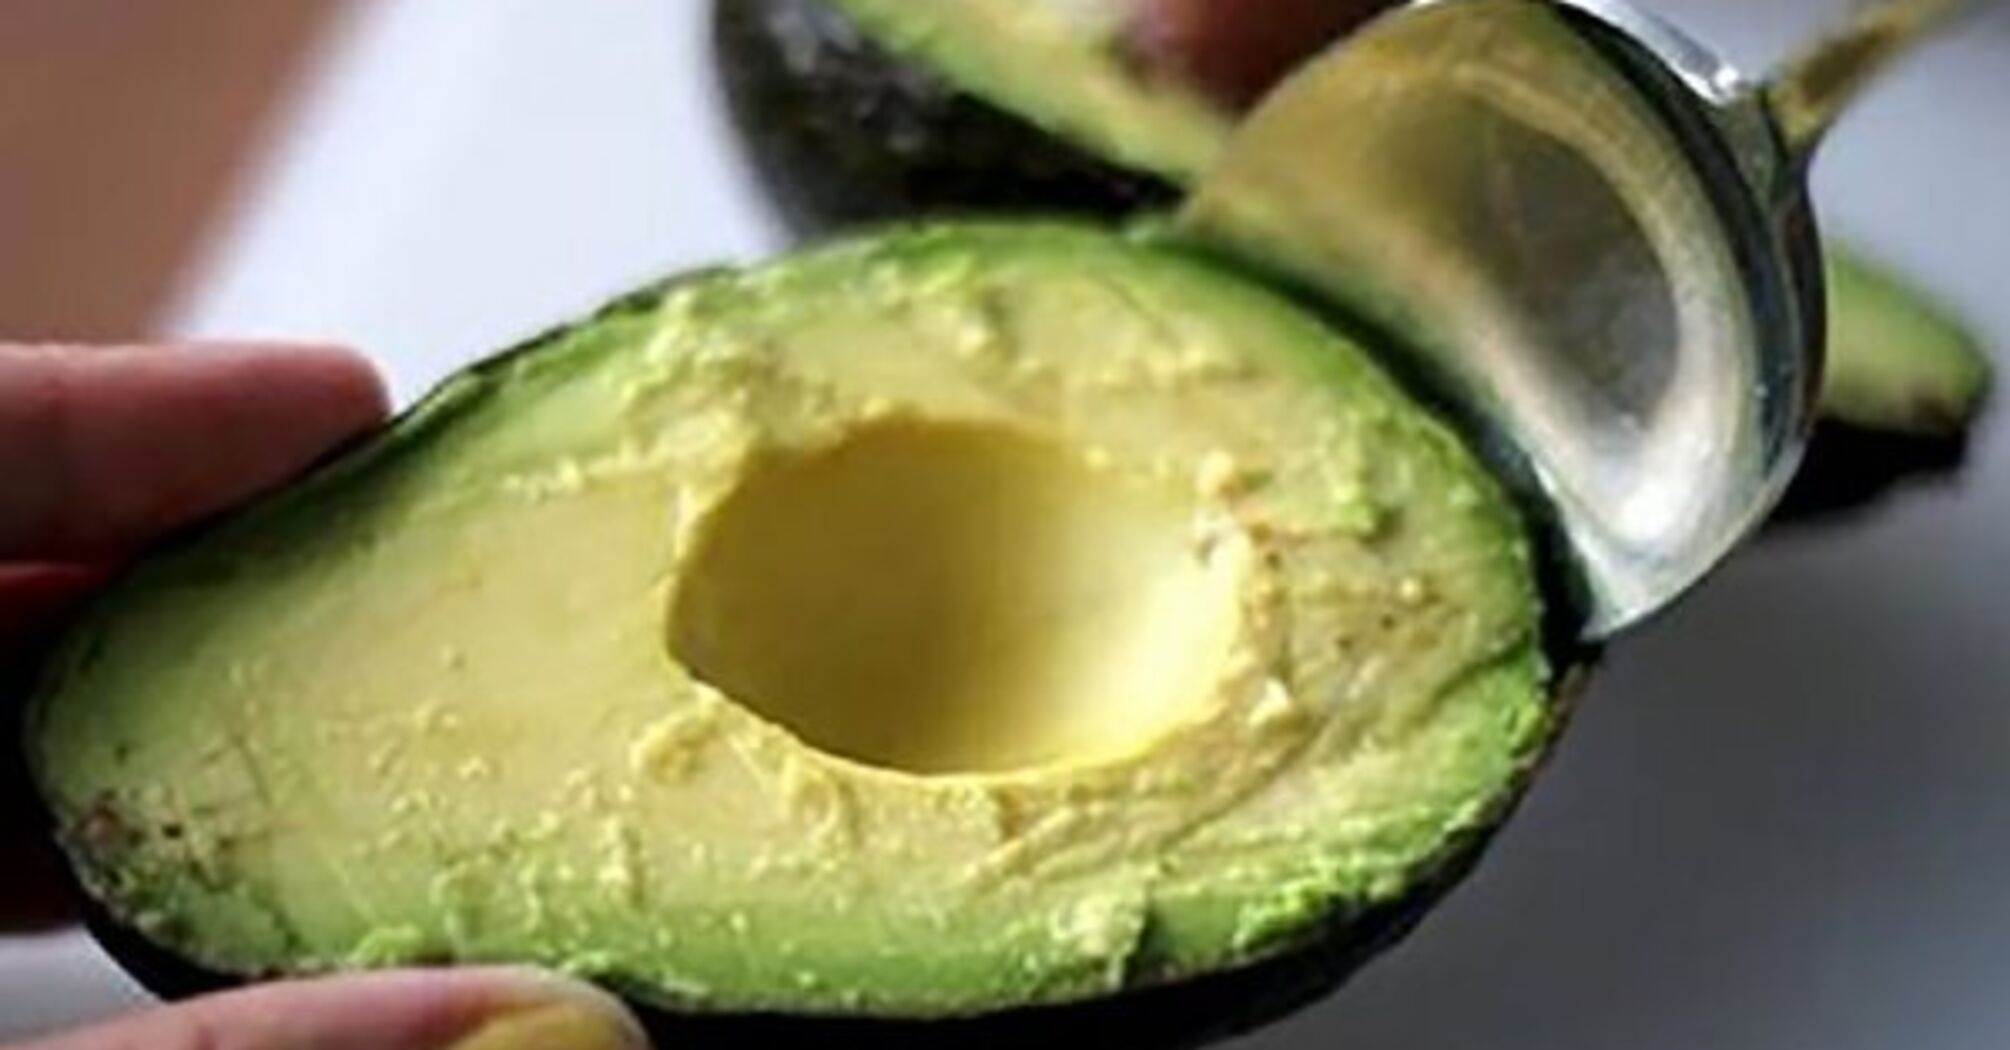 What to do with hard and tasteless avocados